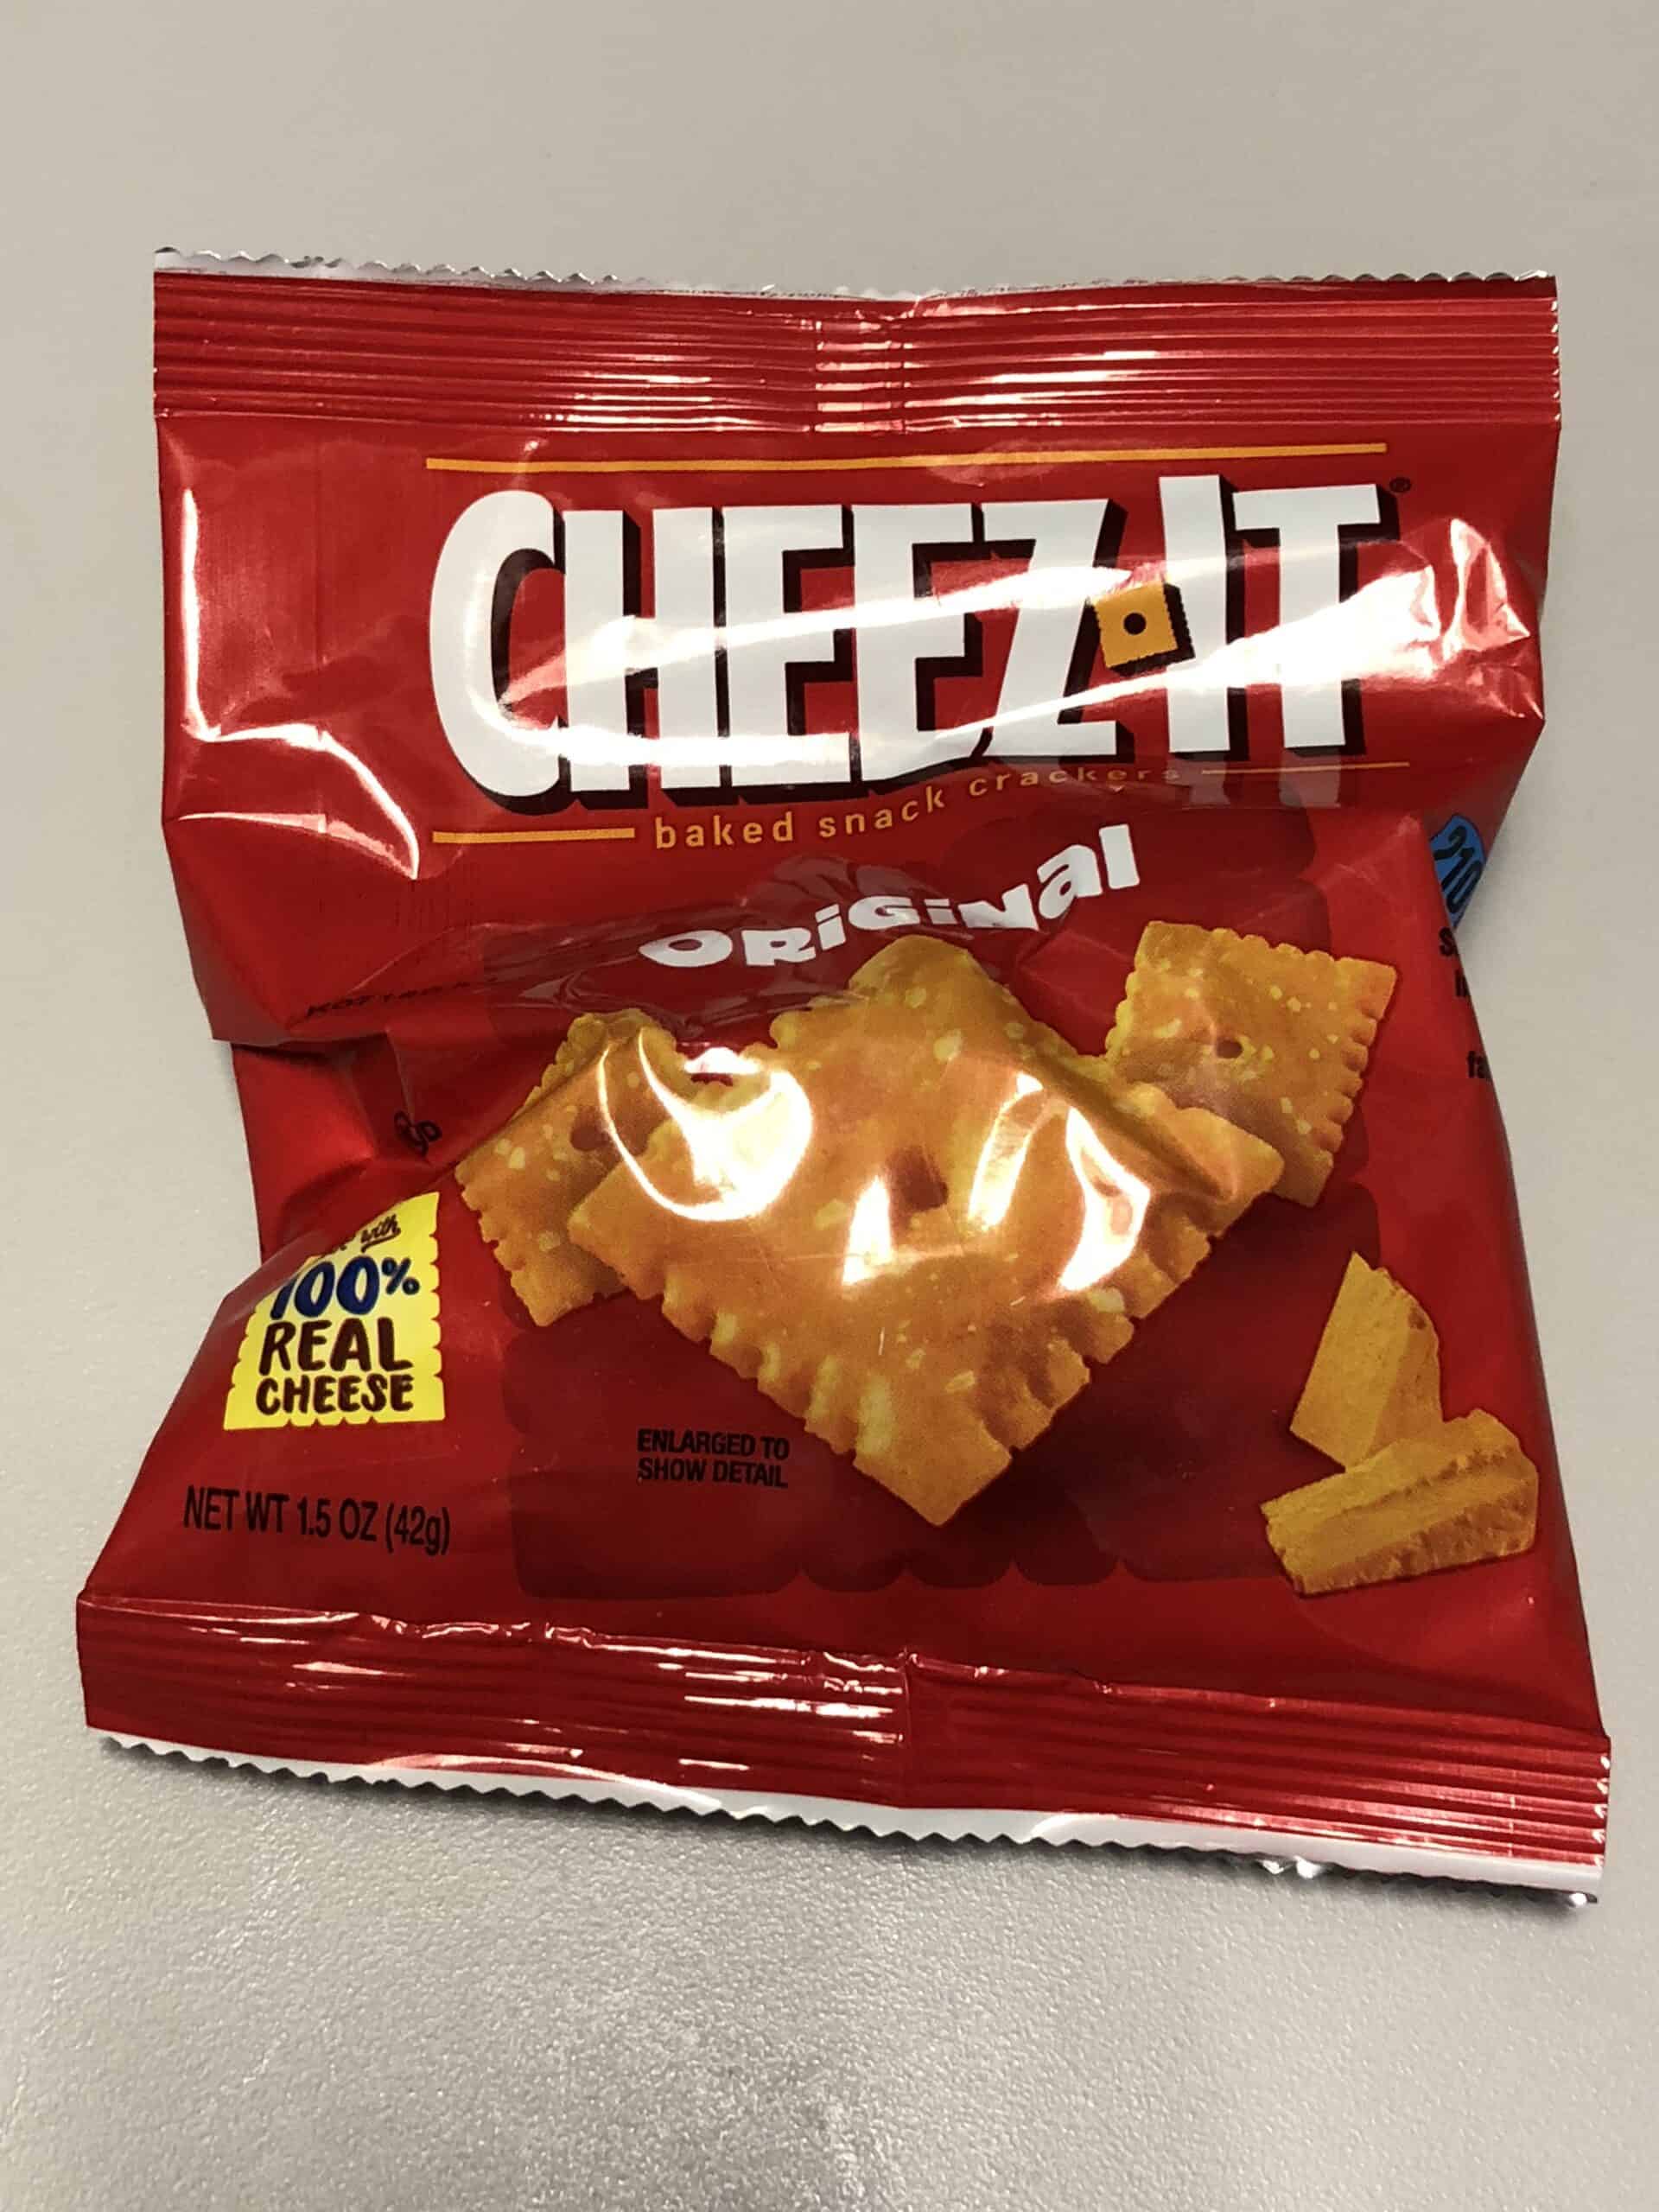 A bag of Cheez-it crackers